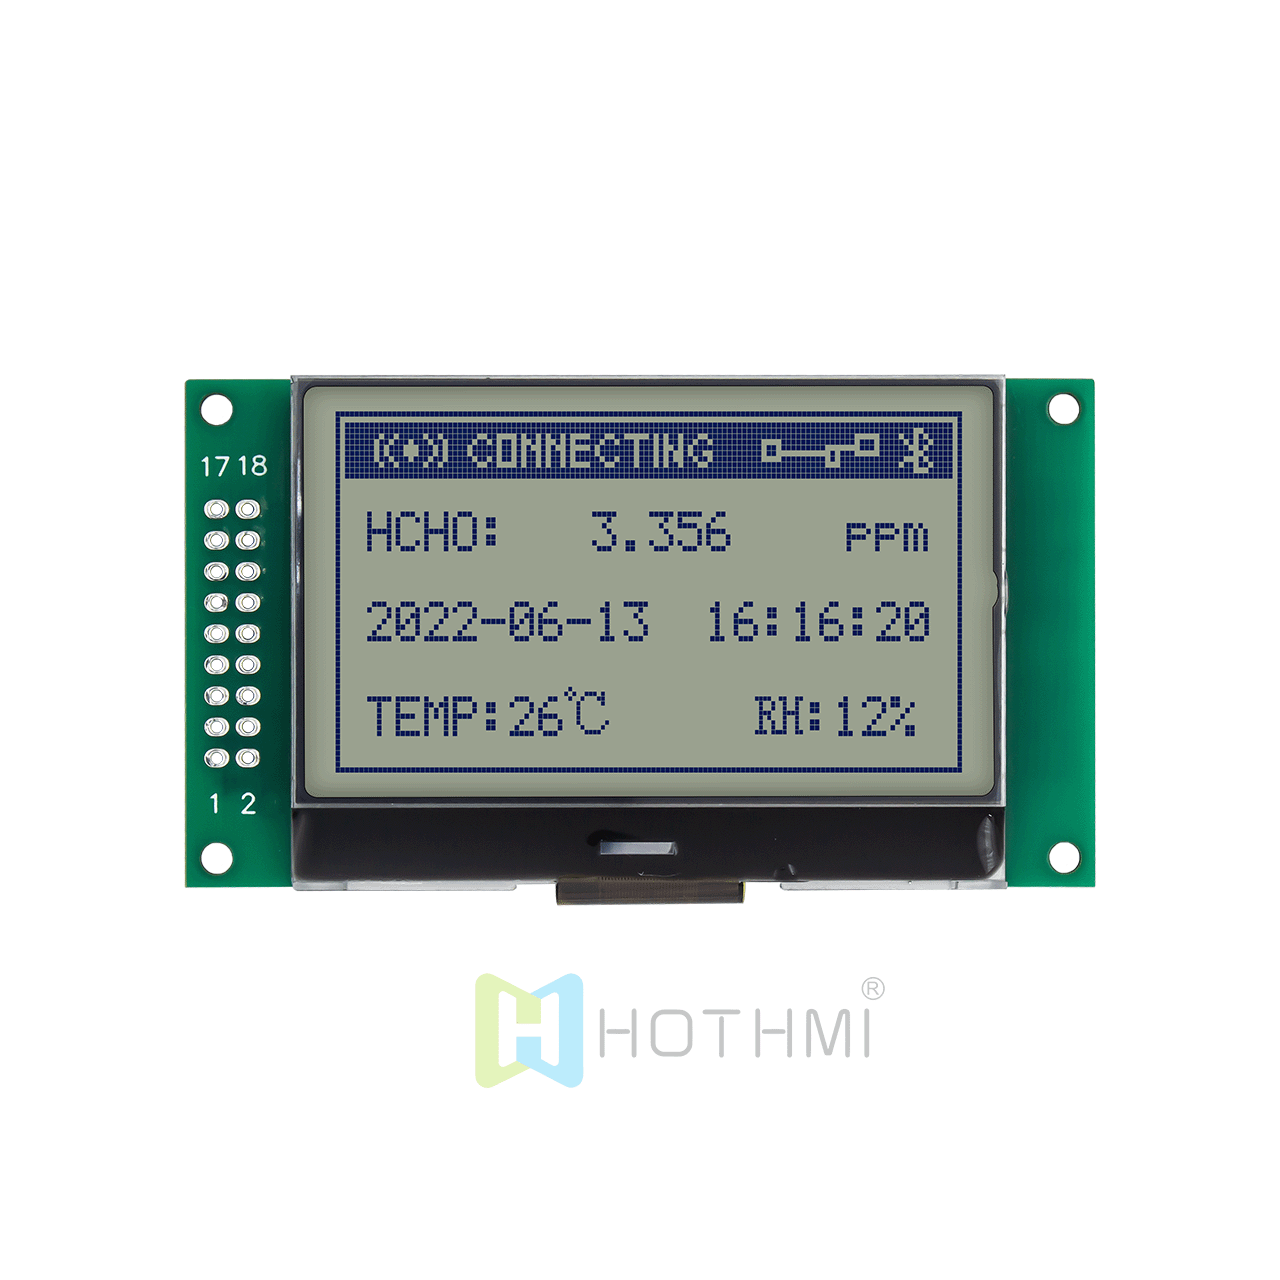 2.4-inch 132x64 LCD graphic LCD screen/13264 graphic dot matrix LCD module/STN positive display/blue text on gray background